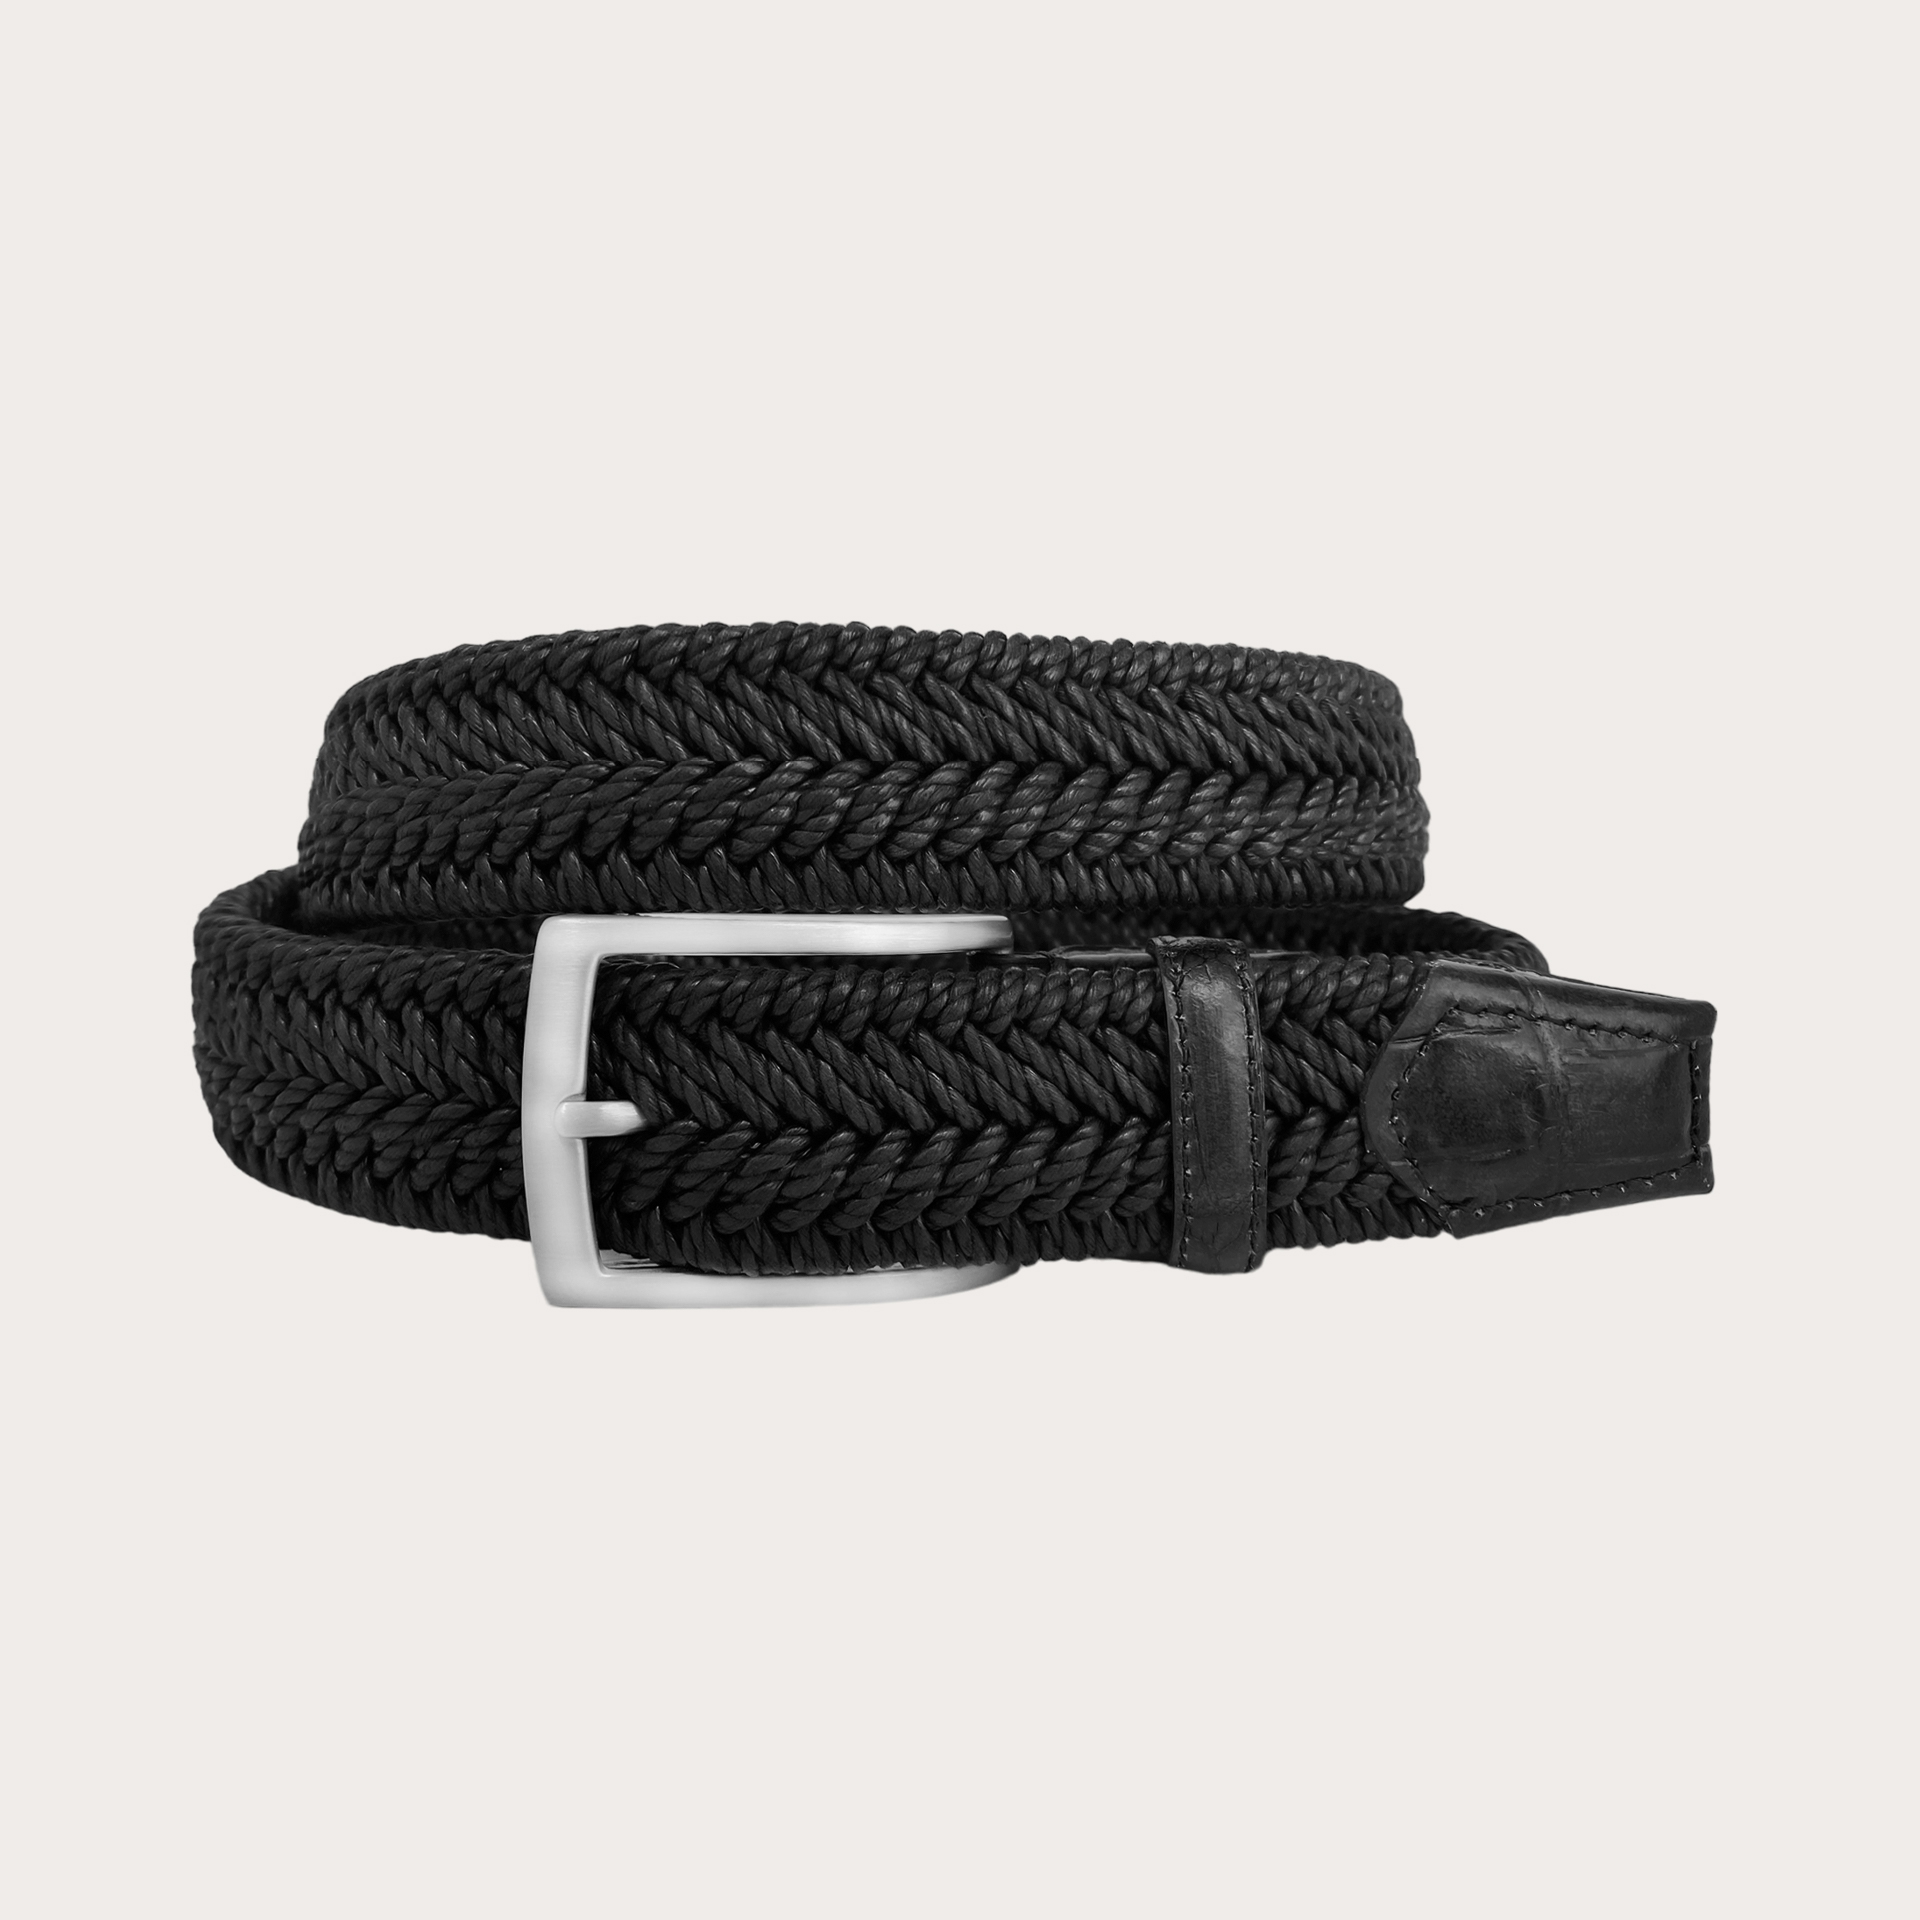 High-quality BRUCLE black belt, Handmade, Made in Italy